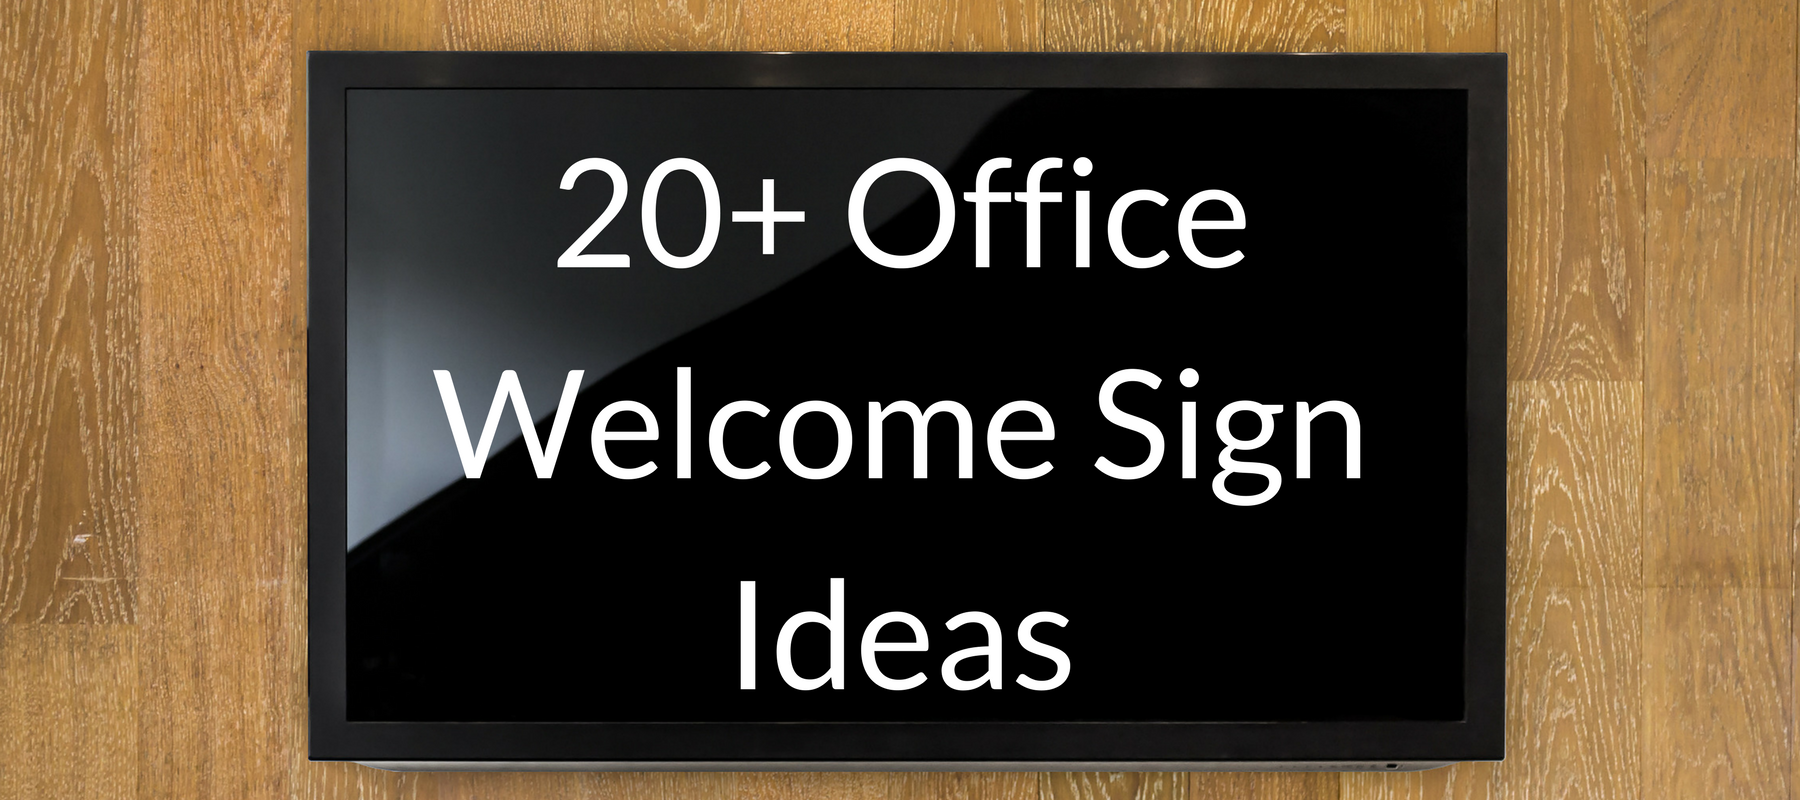 20-office-welcome-sign-ideas